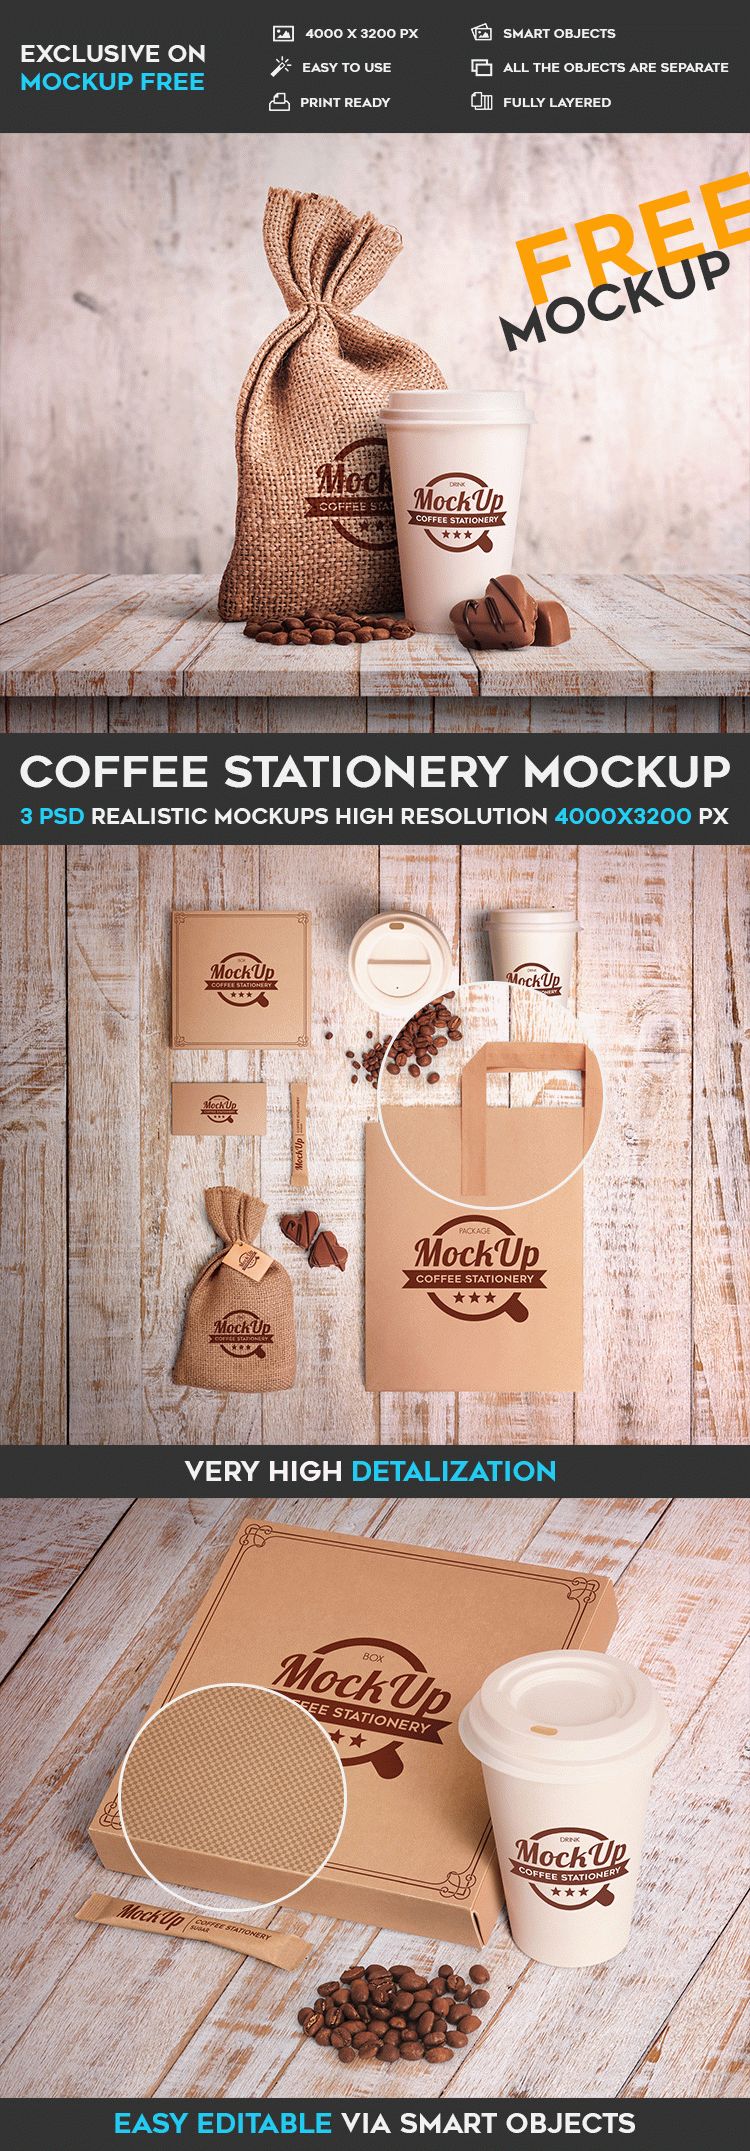 bigpreview_coffee-stationery